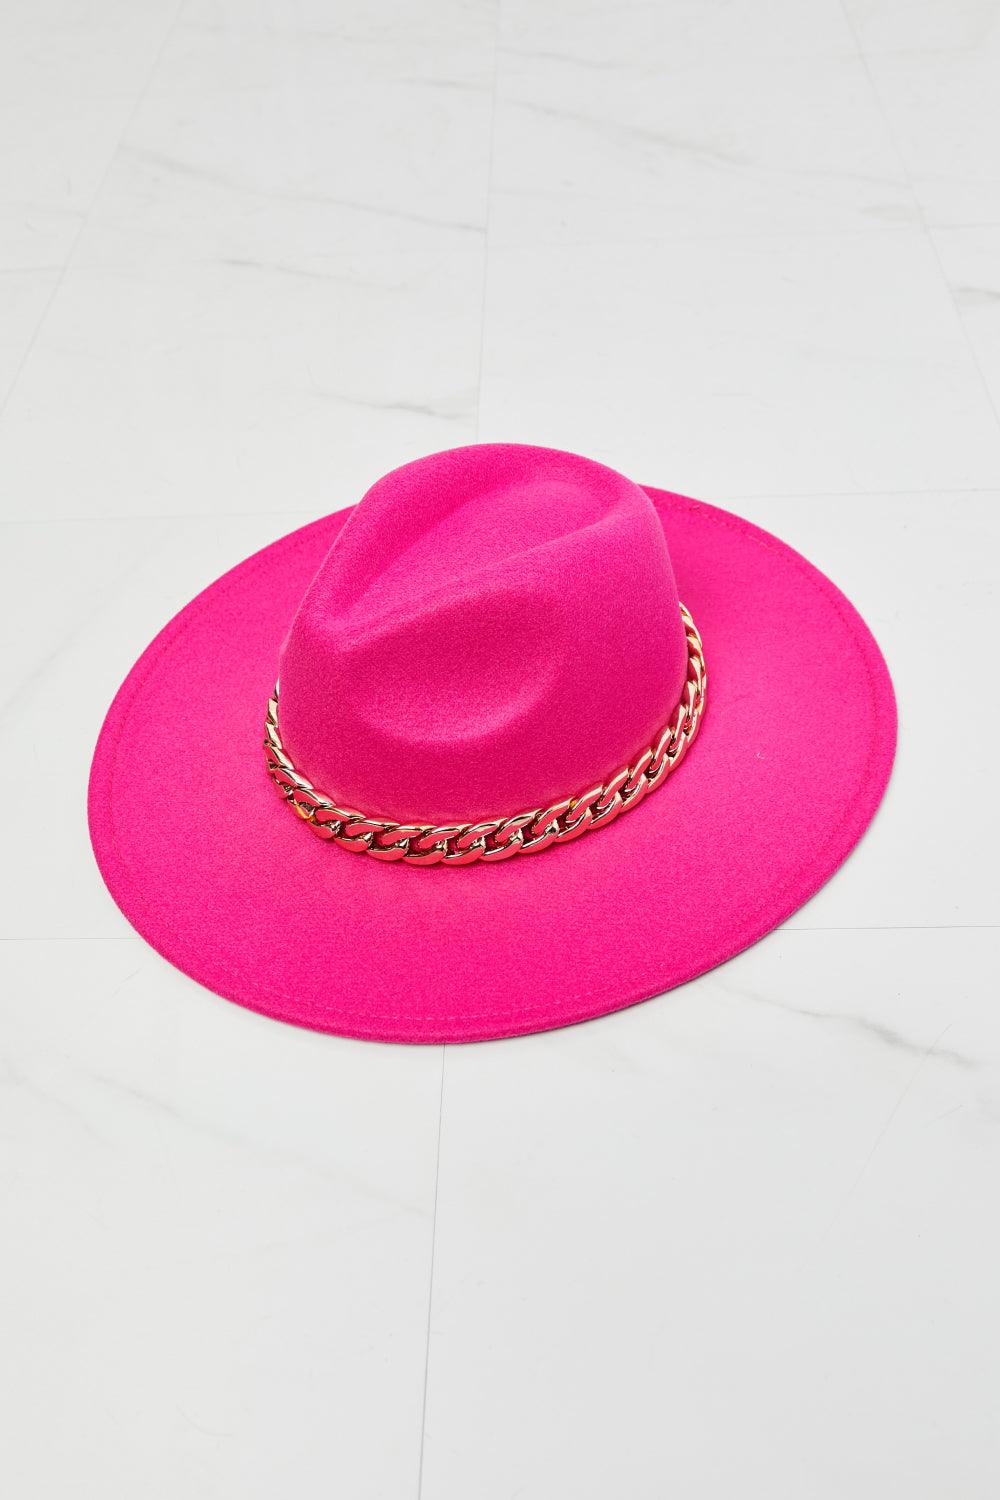 Fame Keep Your Promise Fedora Hat in Pink Hats